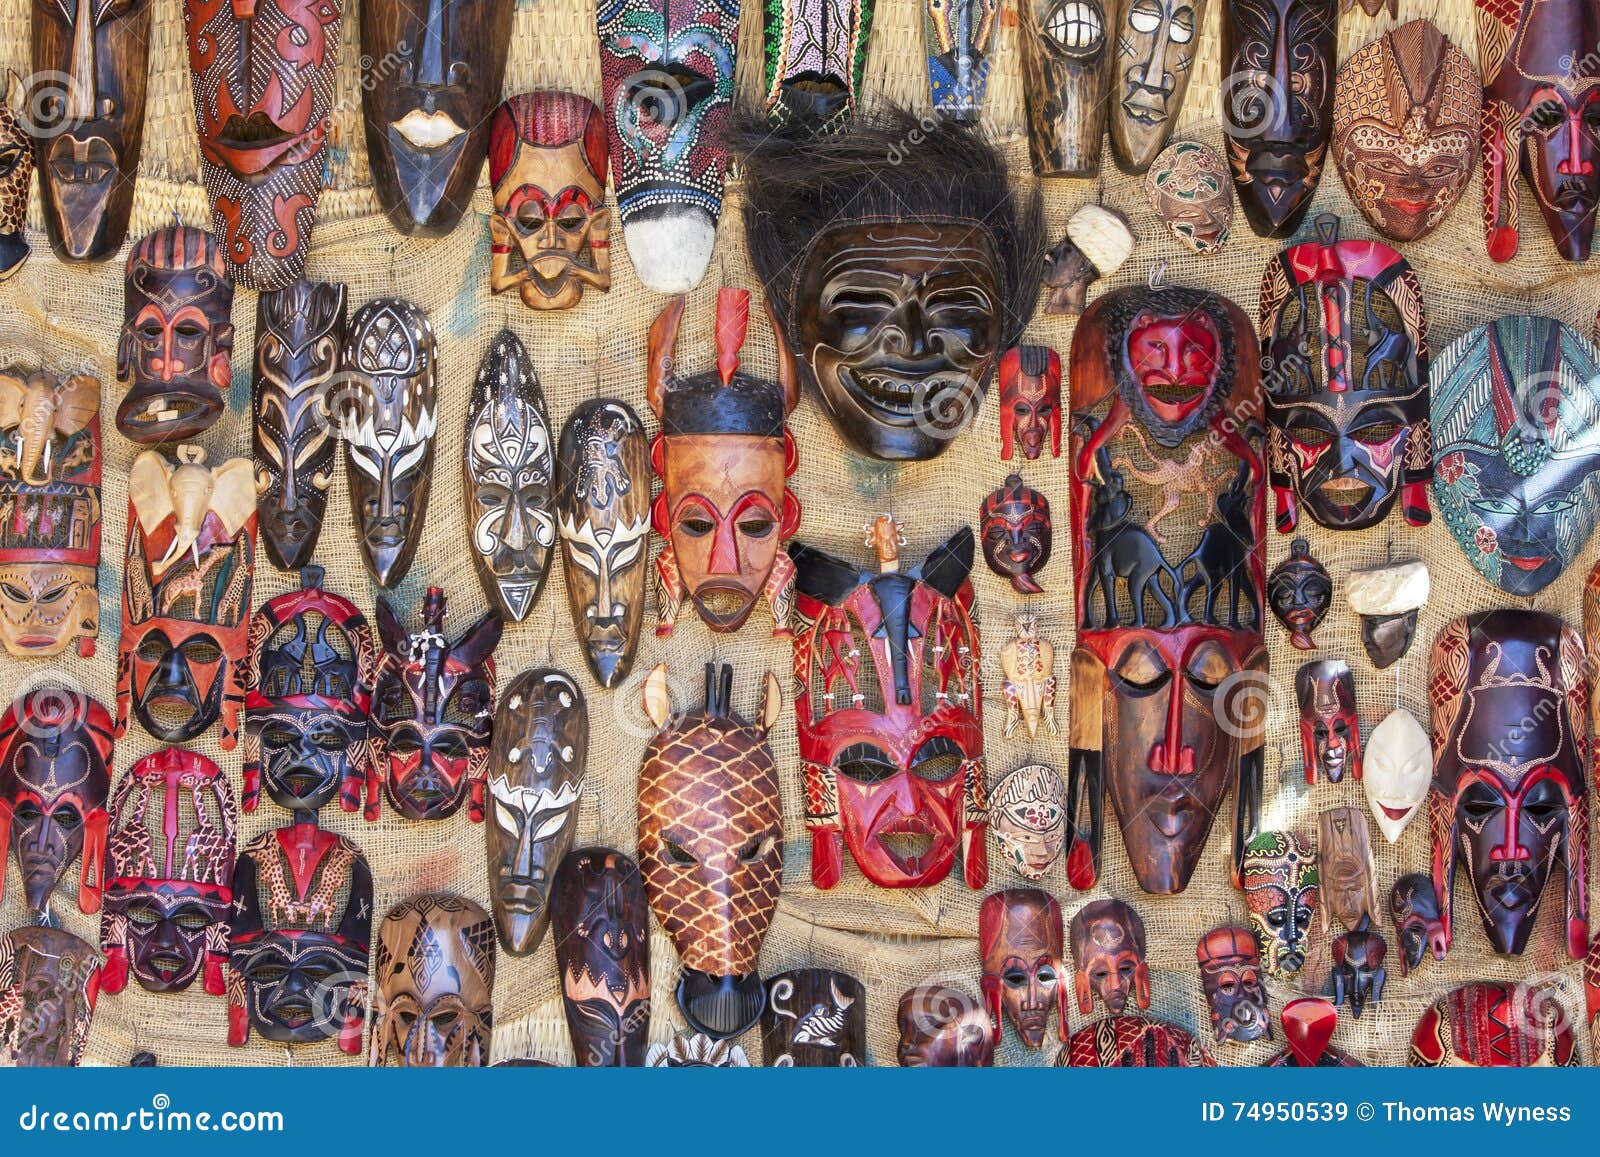 a selection of masks for sale in the nubian village of garb-sohel in the aswan region of egypt.